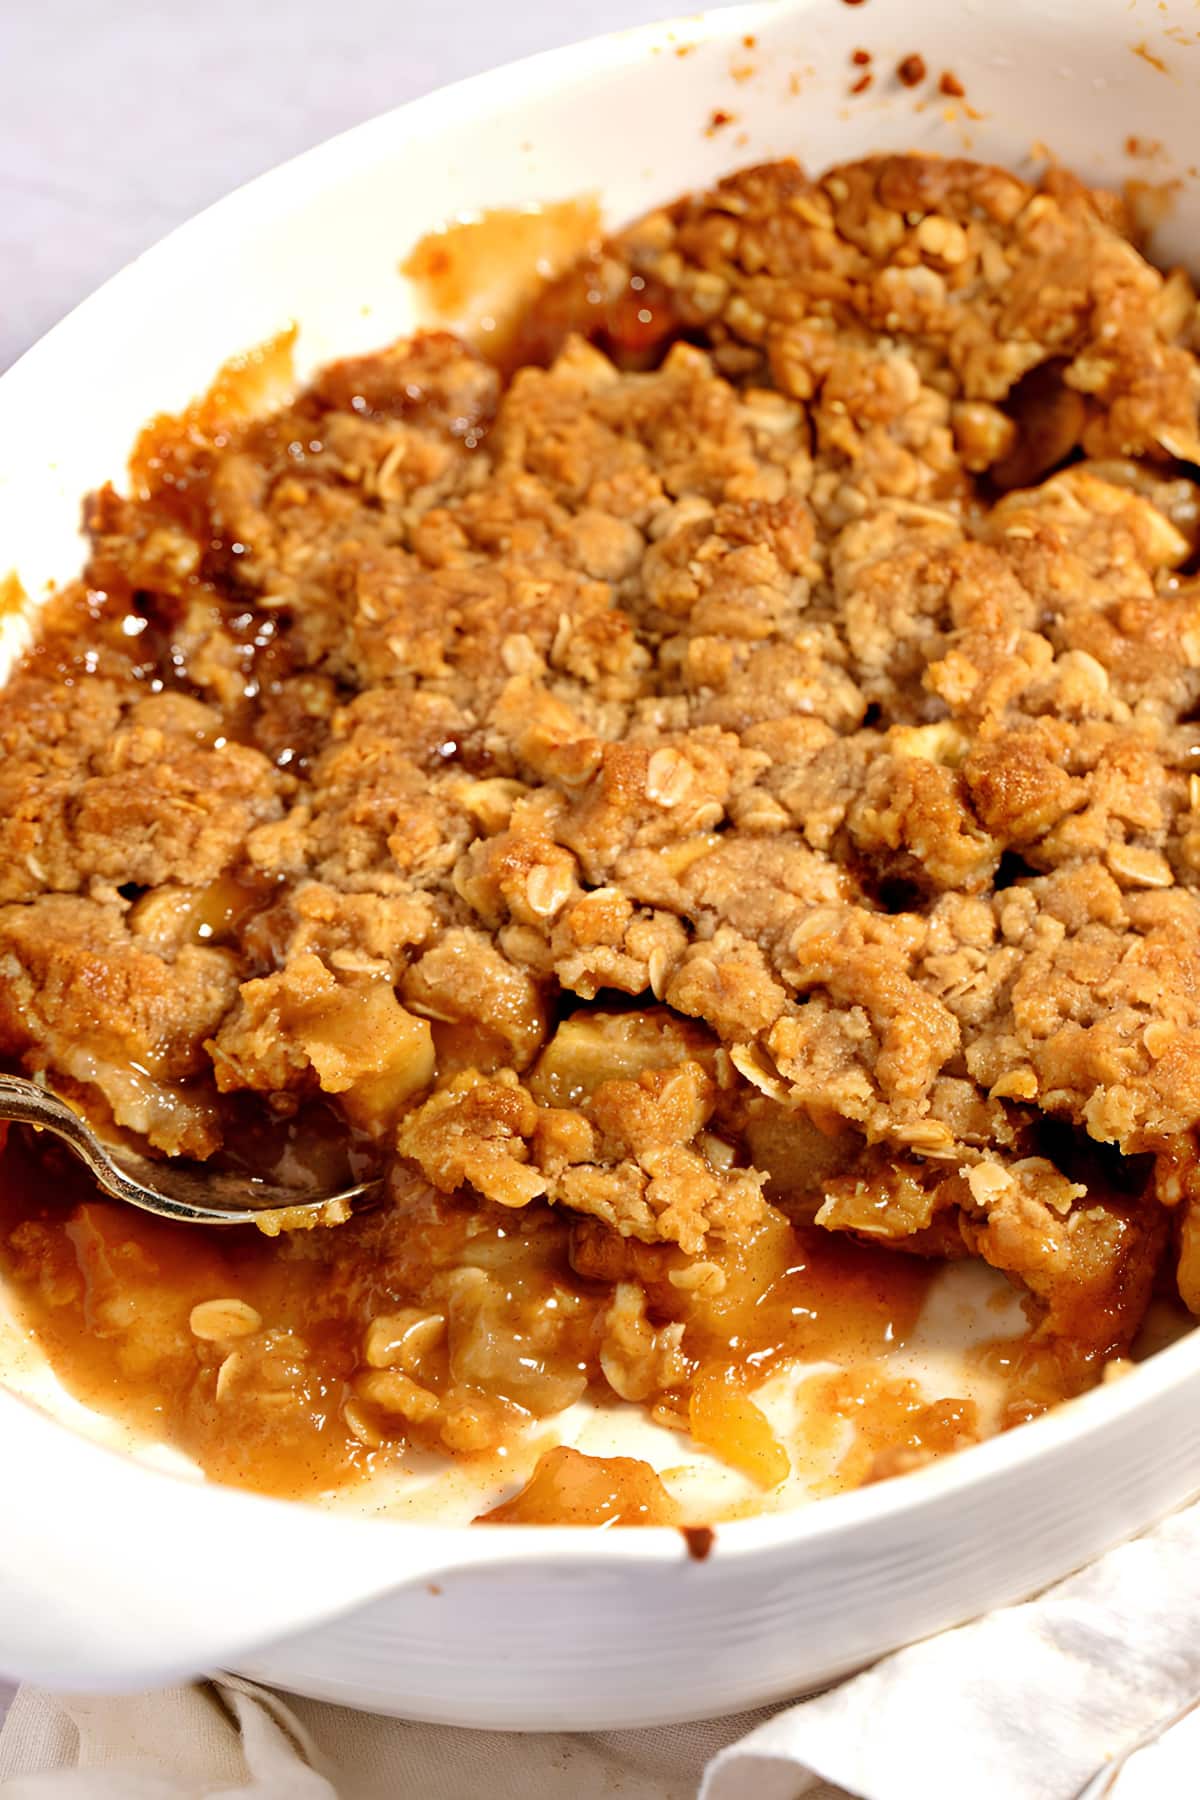 Apple crumble on a casserole dish with spoon.